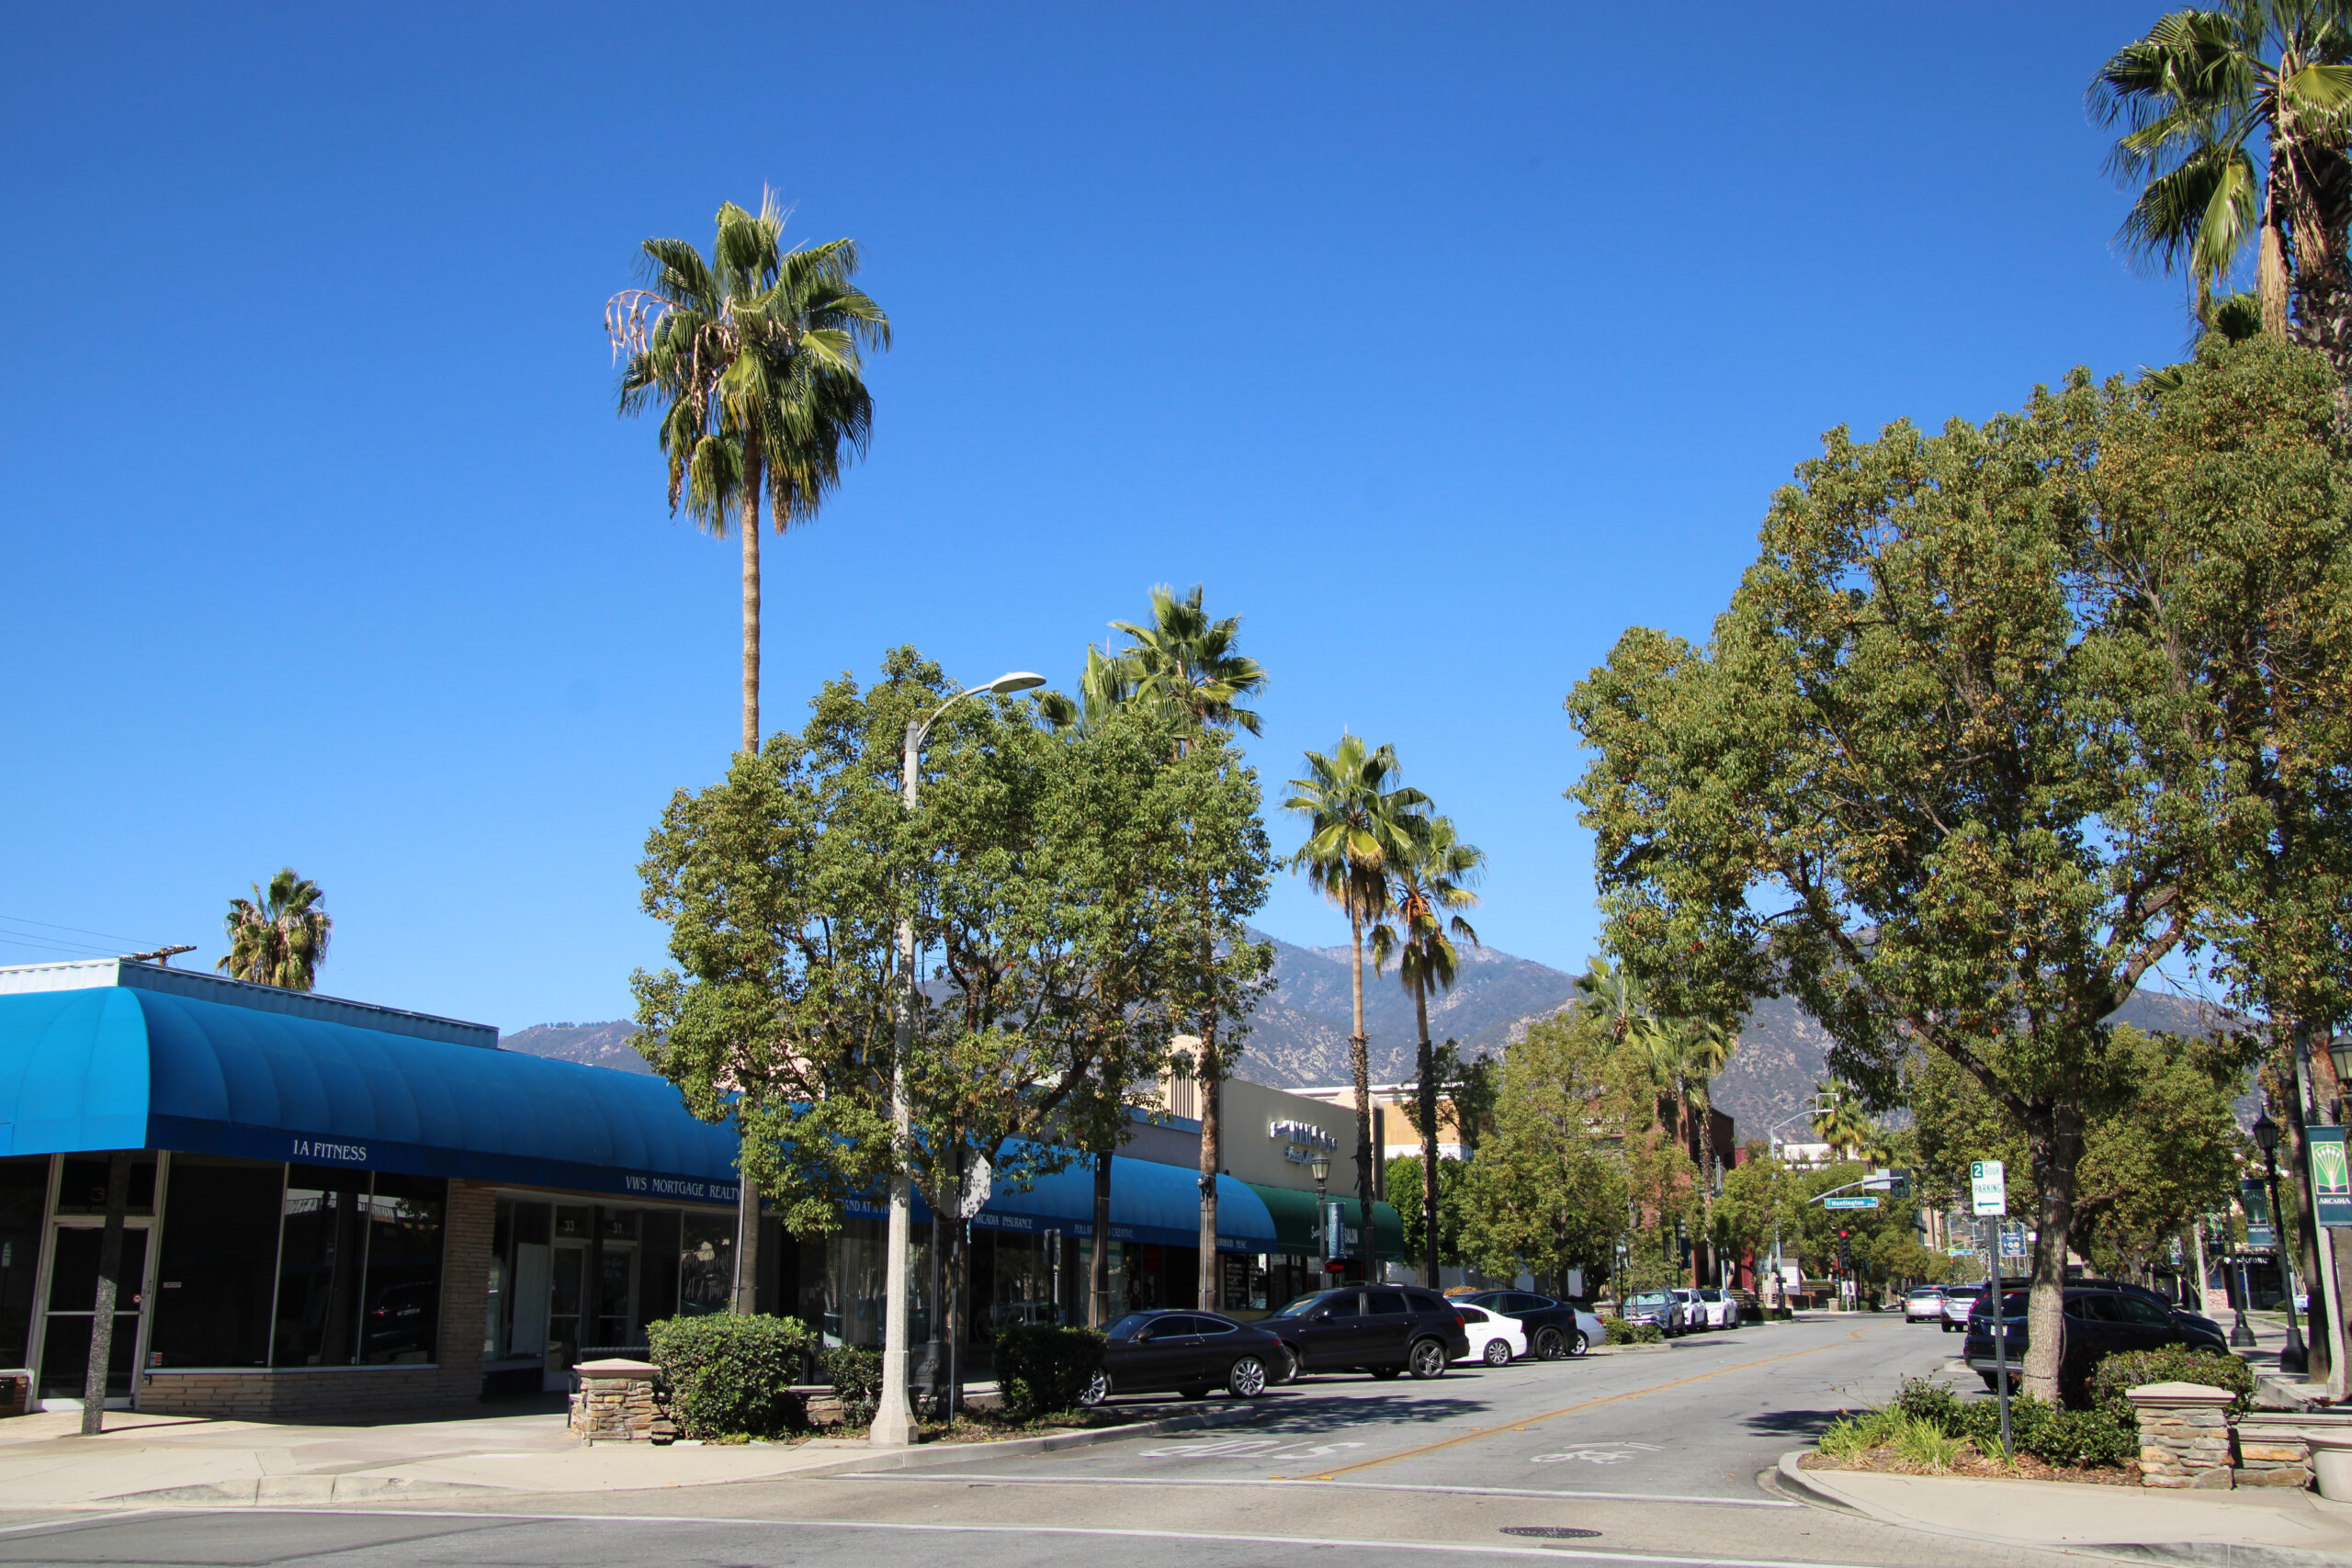 a street scene showing buildings and trees with mountains in the background